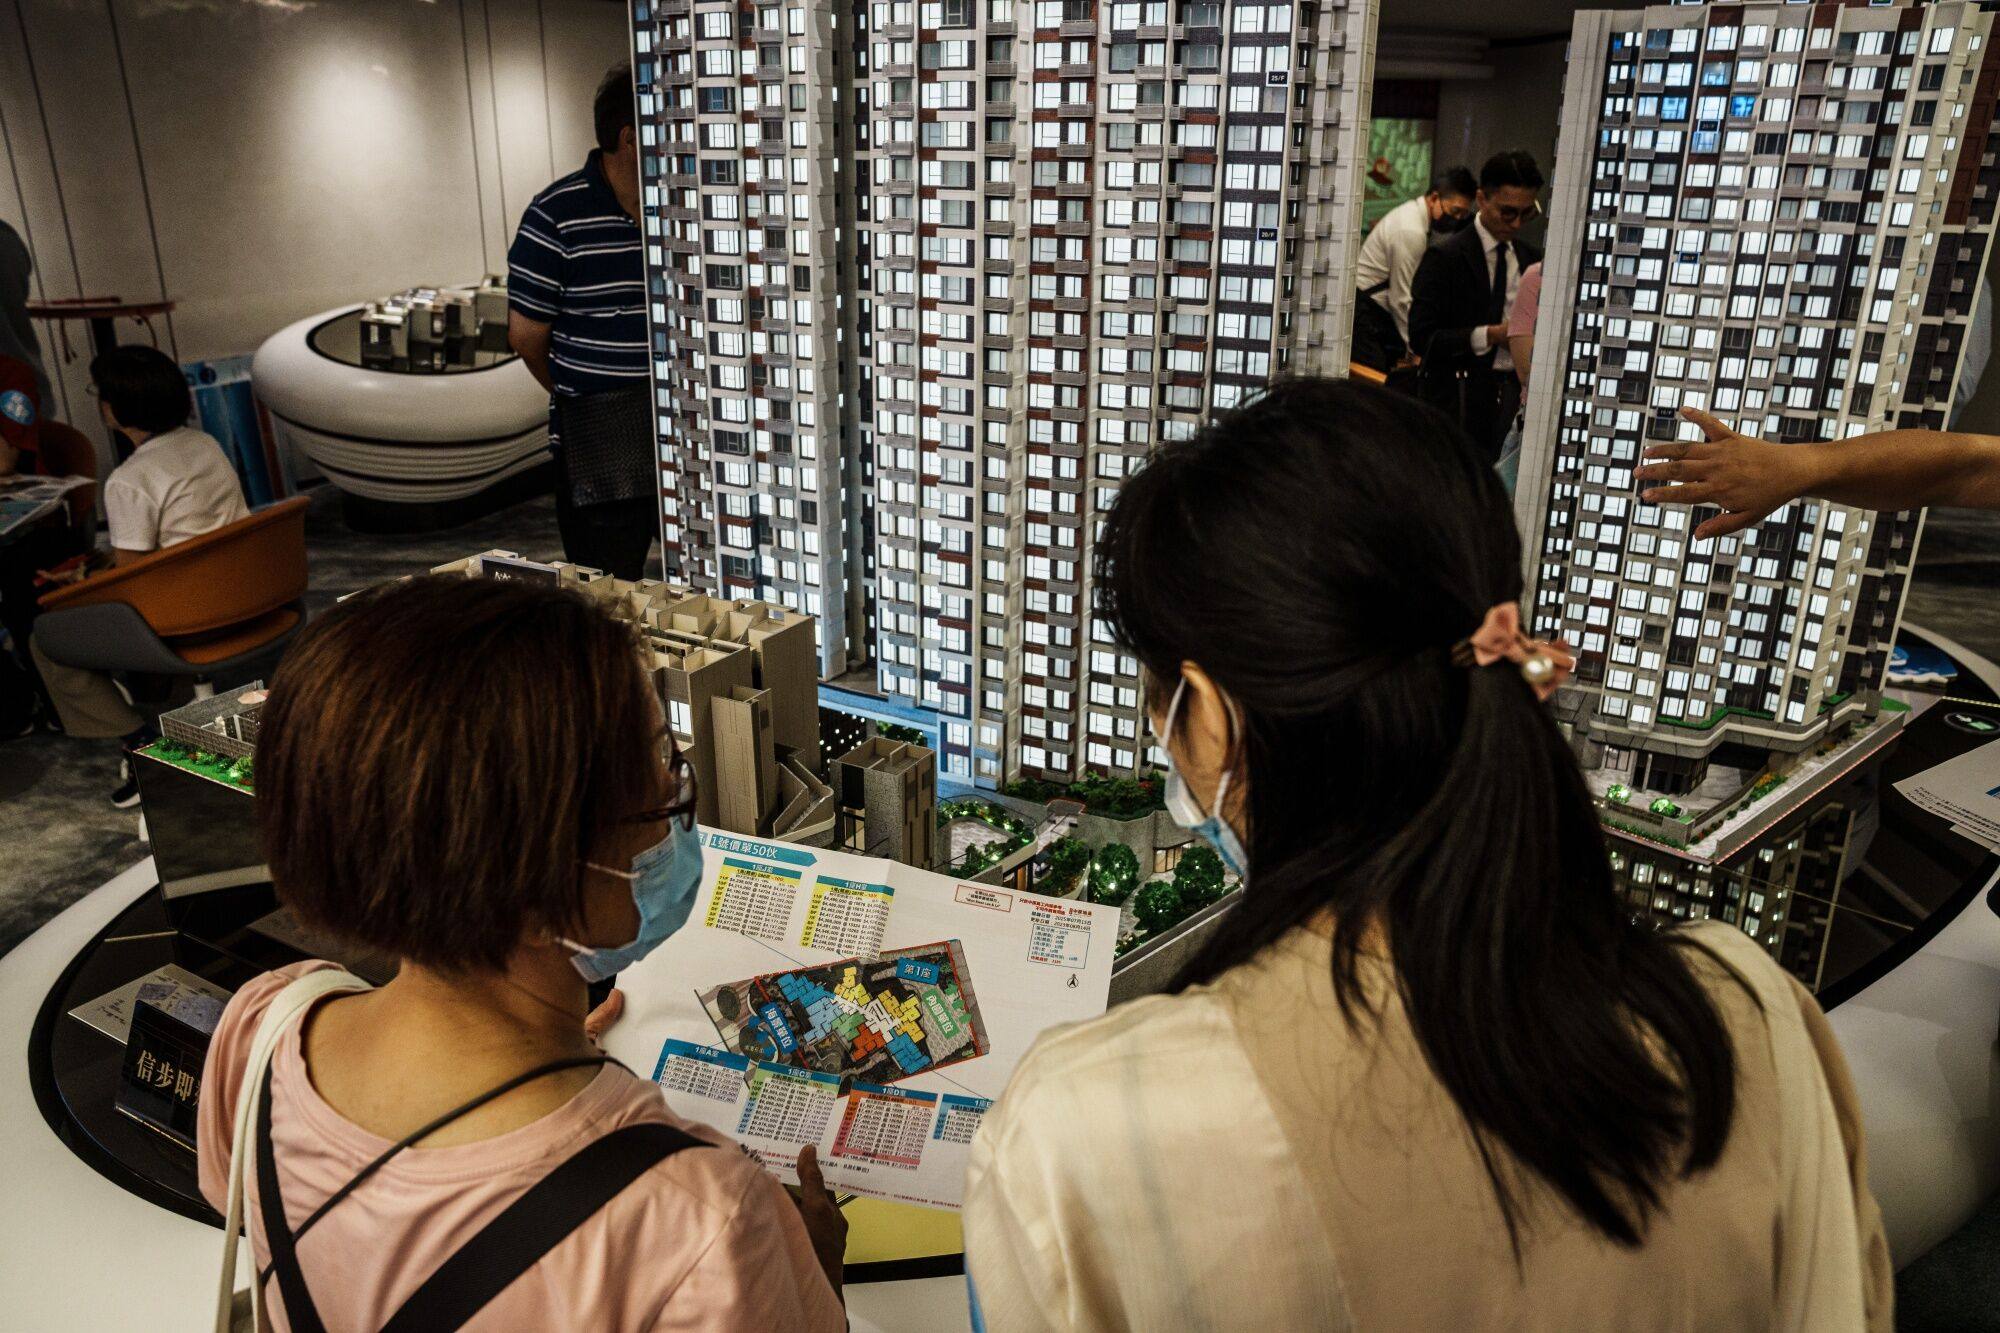 A model of the Coastline residential project being developed by CK Asset Holdings. Photo: Bloomberg